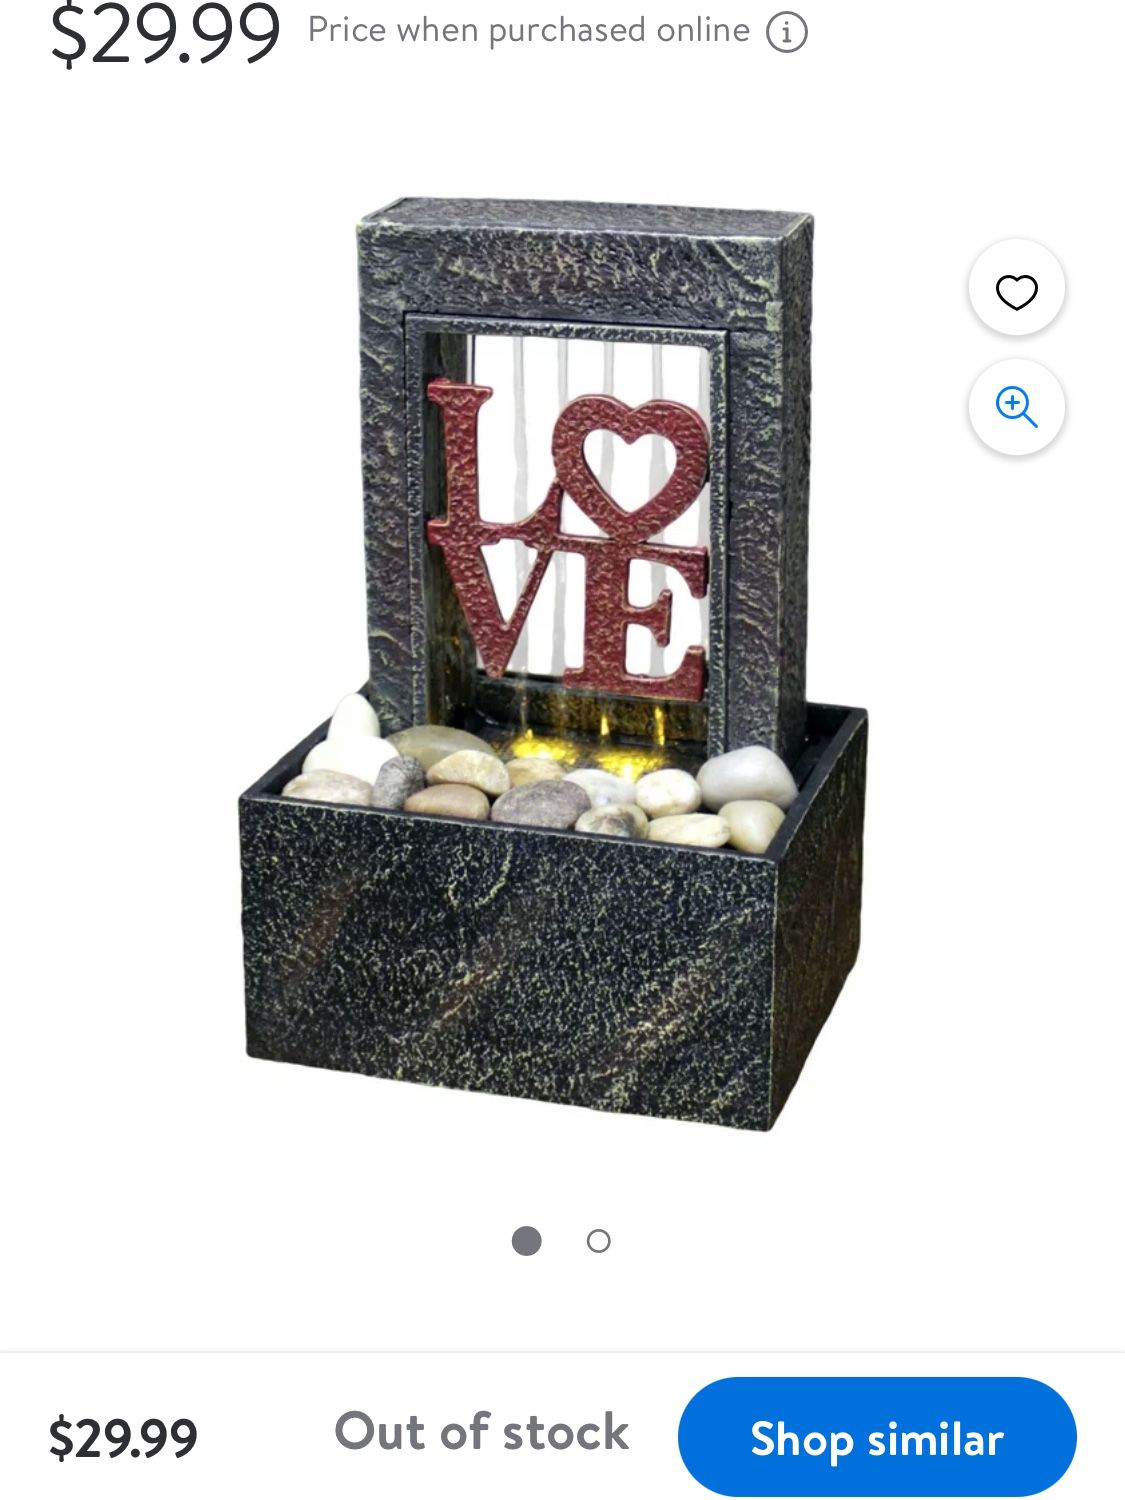 Raining Love Led Small Table Fountain with river rocks